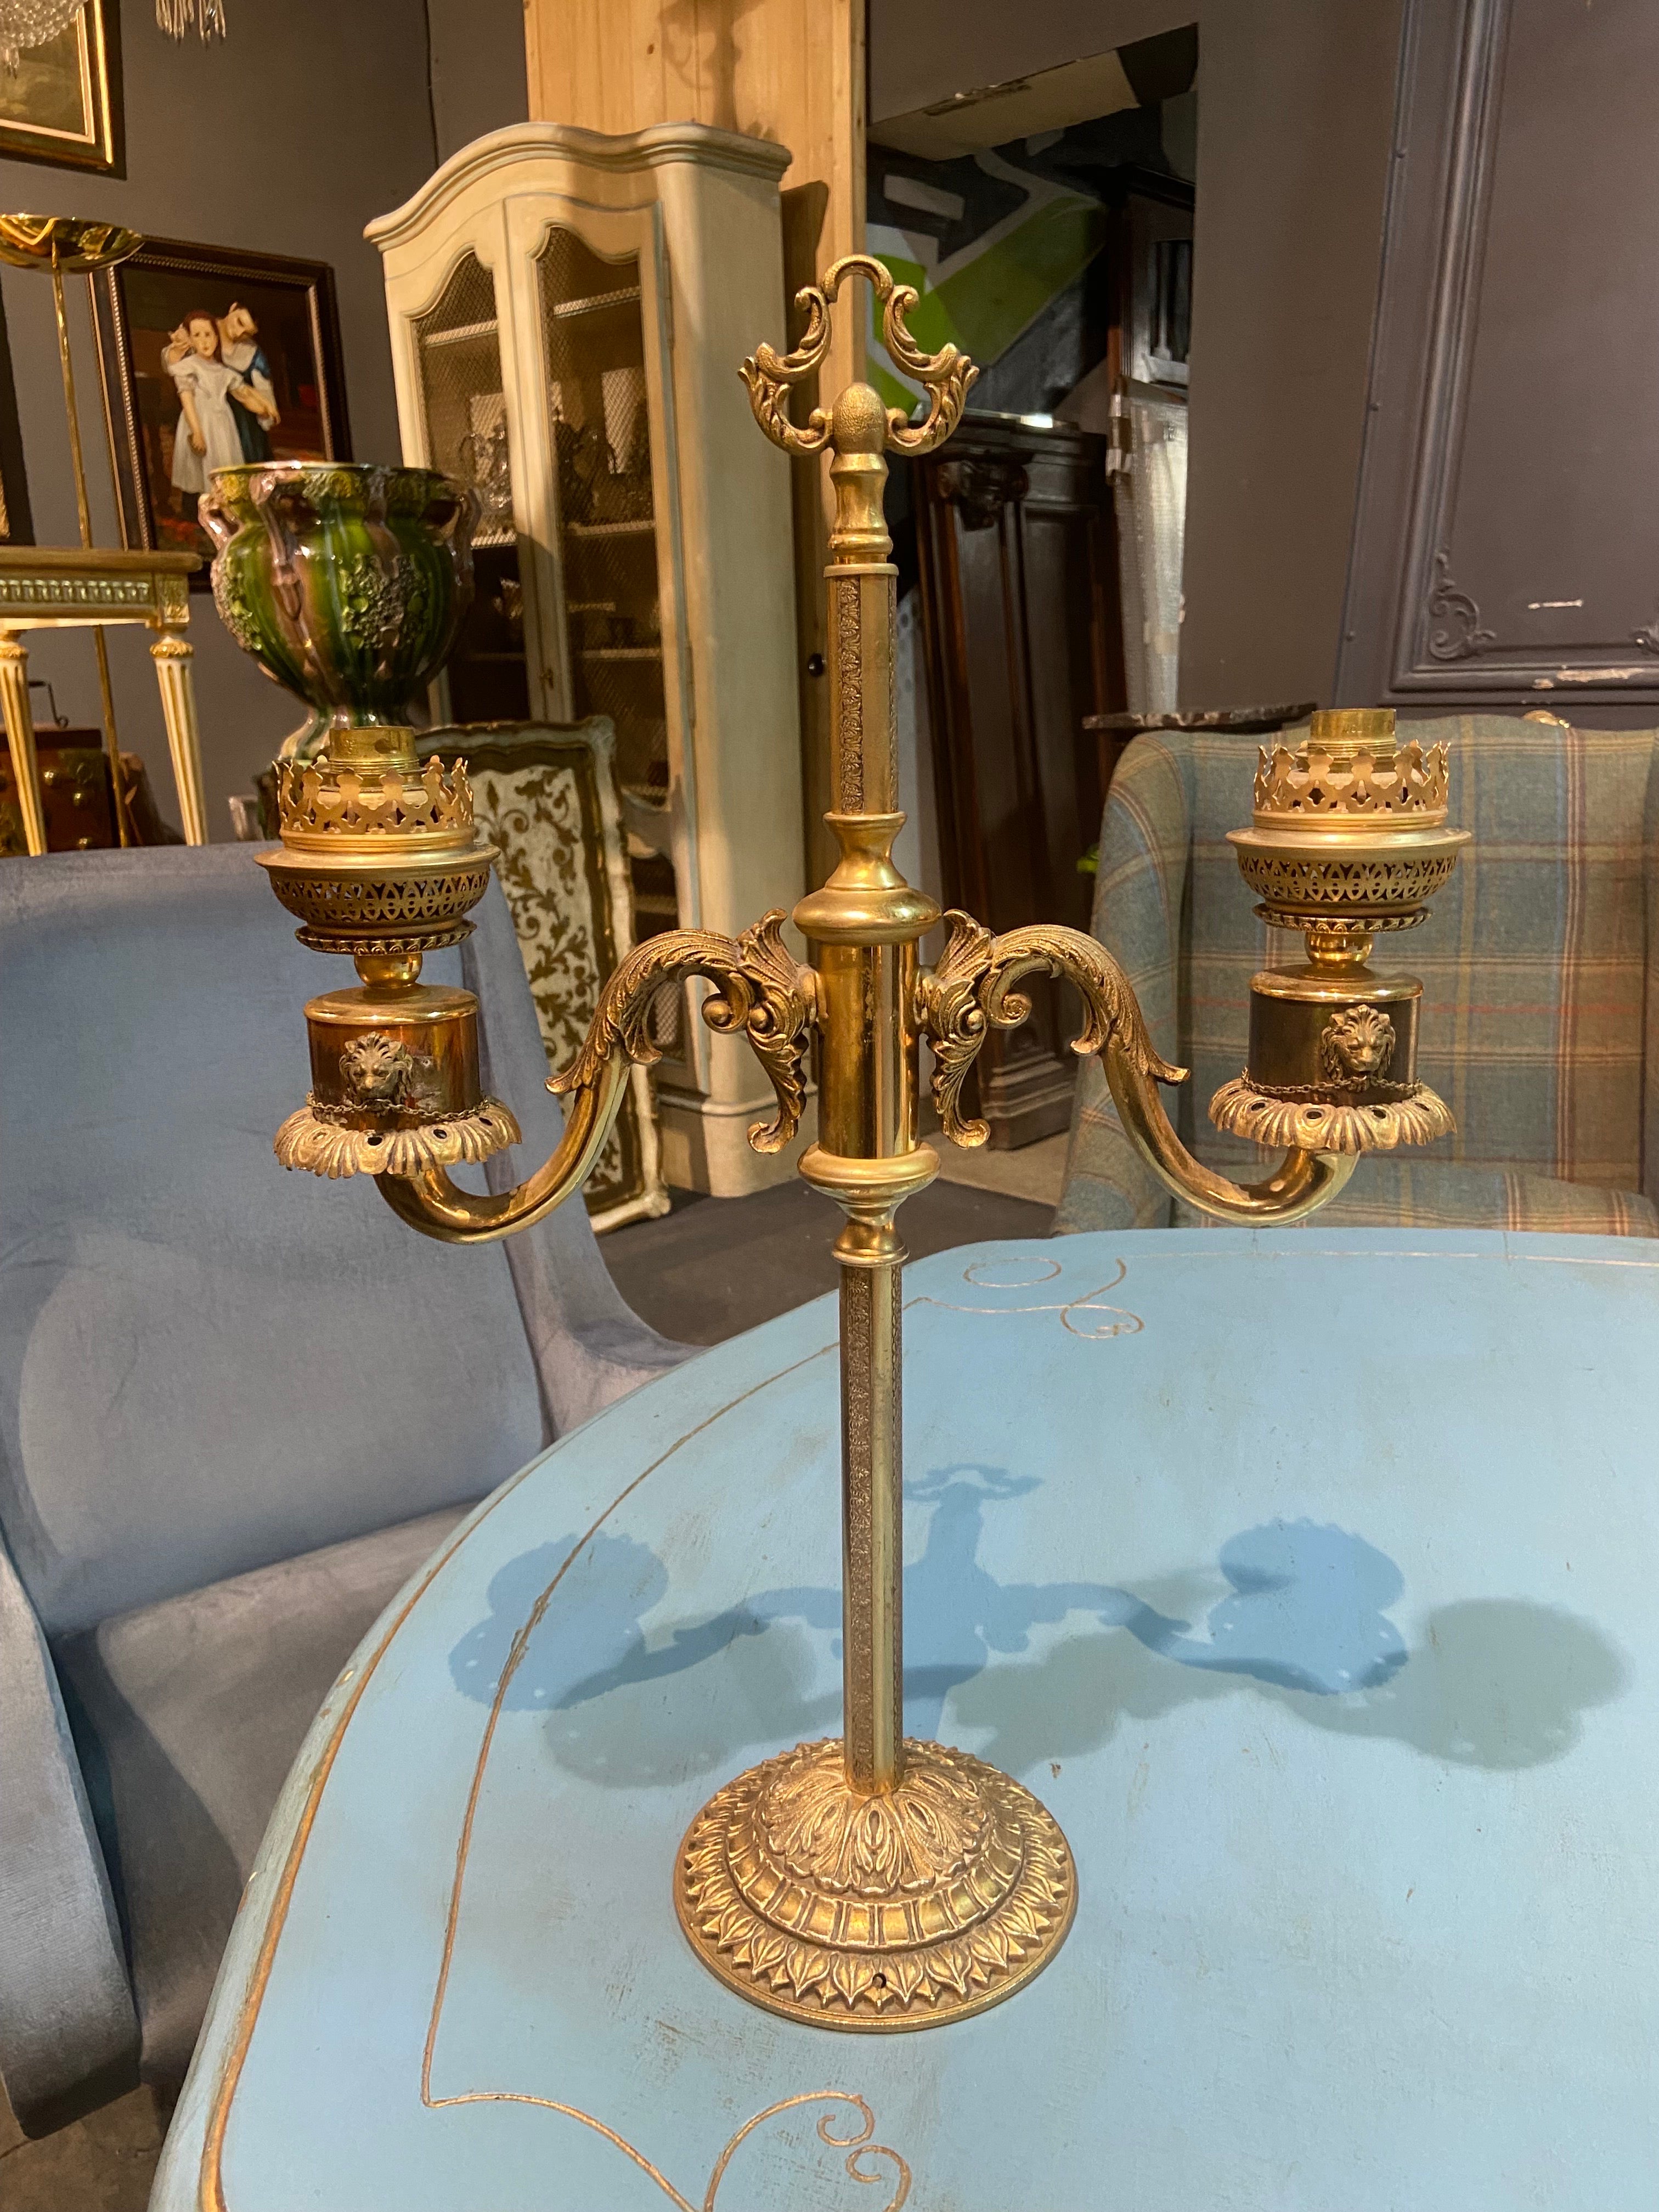 19th century French authentic candlestick electrified in double arm brass lamp.
There are lion's heads on each end and a lovely decoration all around.
The original lampshades are not available.
France, circa 1880.